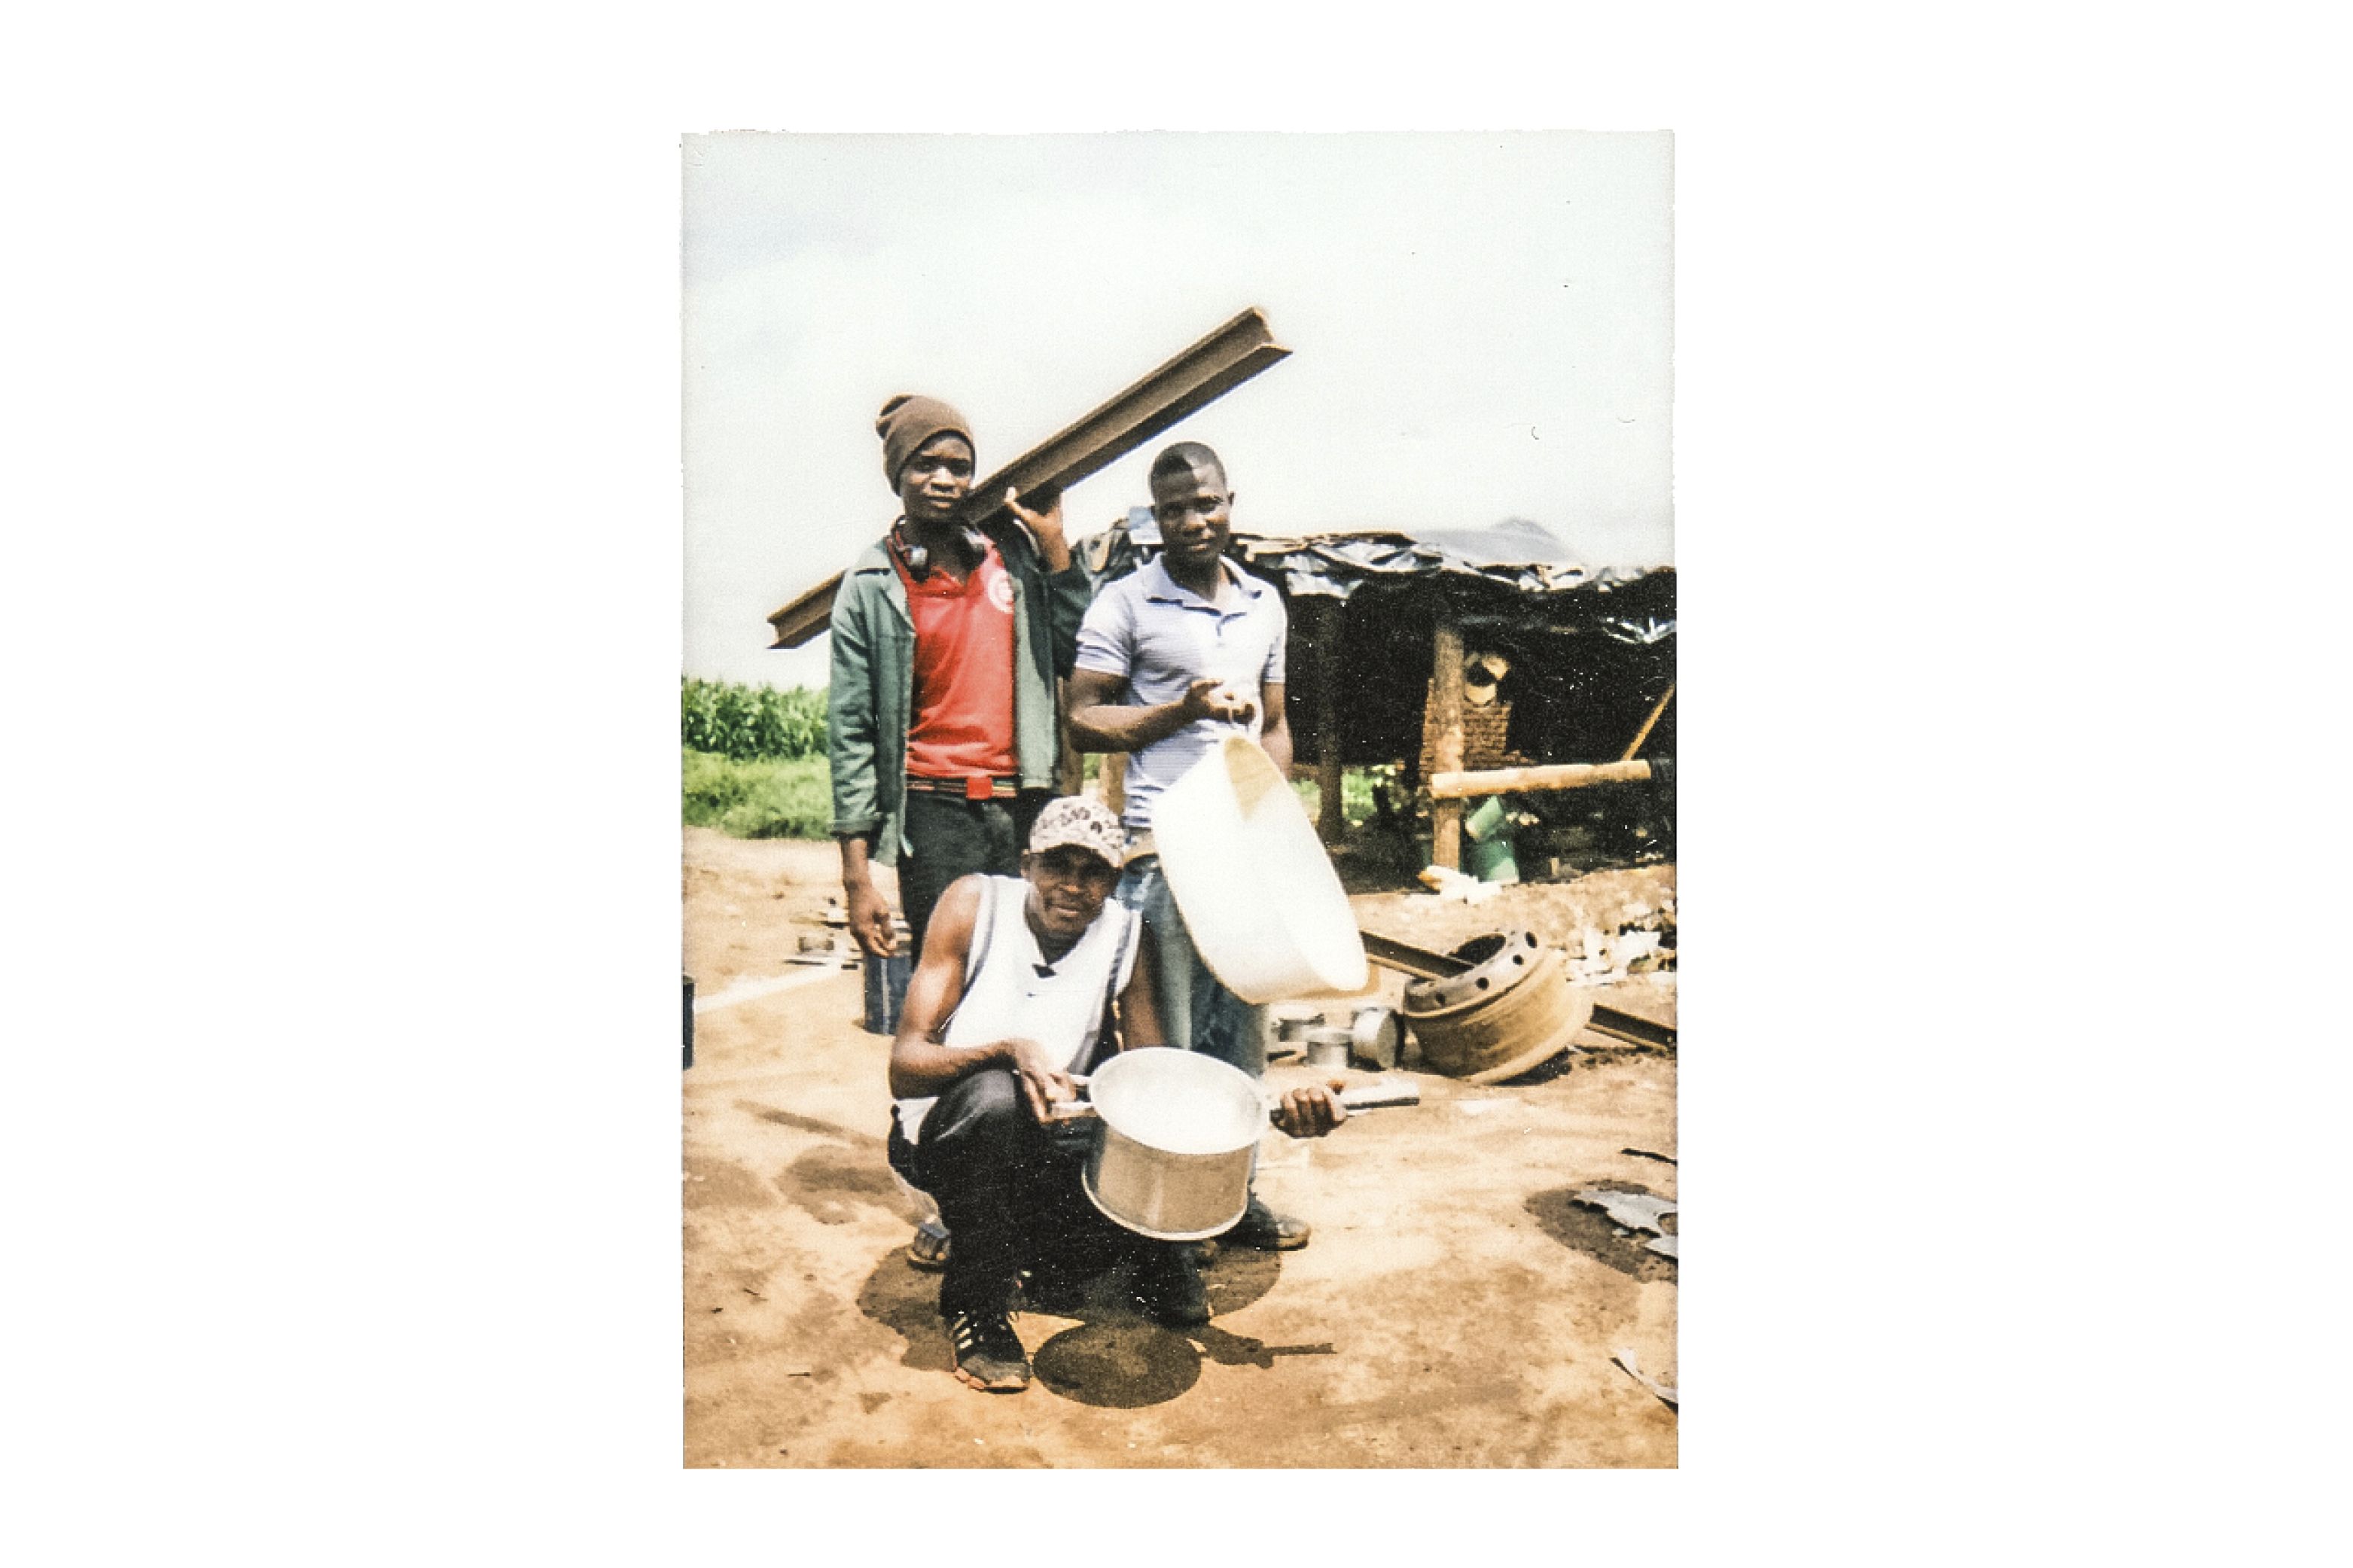 The young men who are producing simple charcoal stoves say they can only work when "we have a zinc sheet from a roof." Image by Nathalie Bertrams. Malawi, 2017.